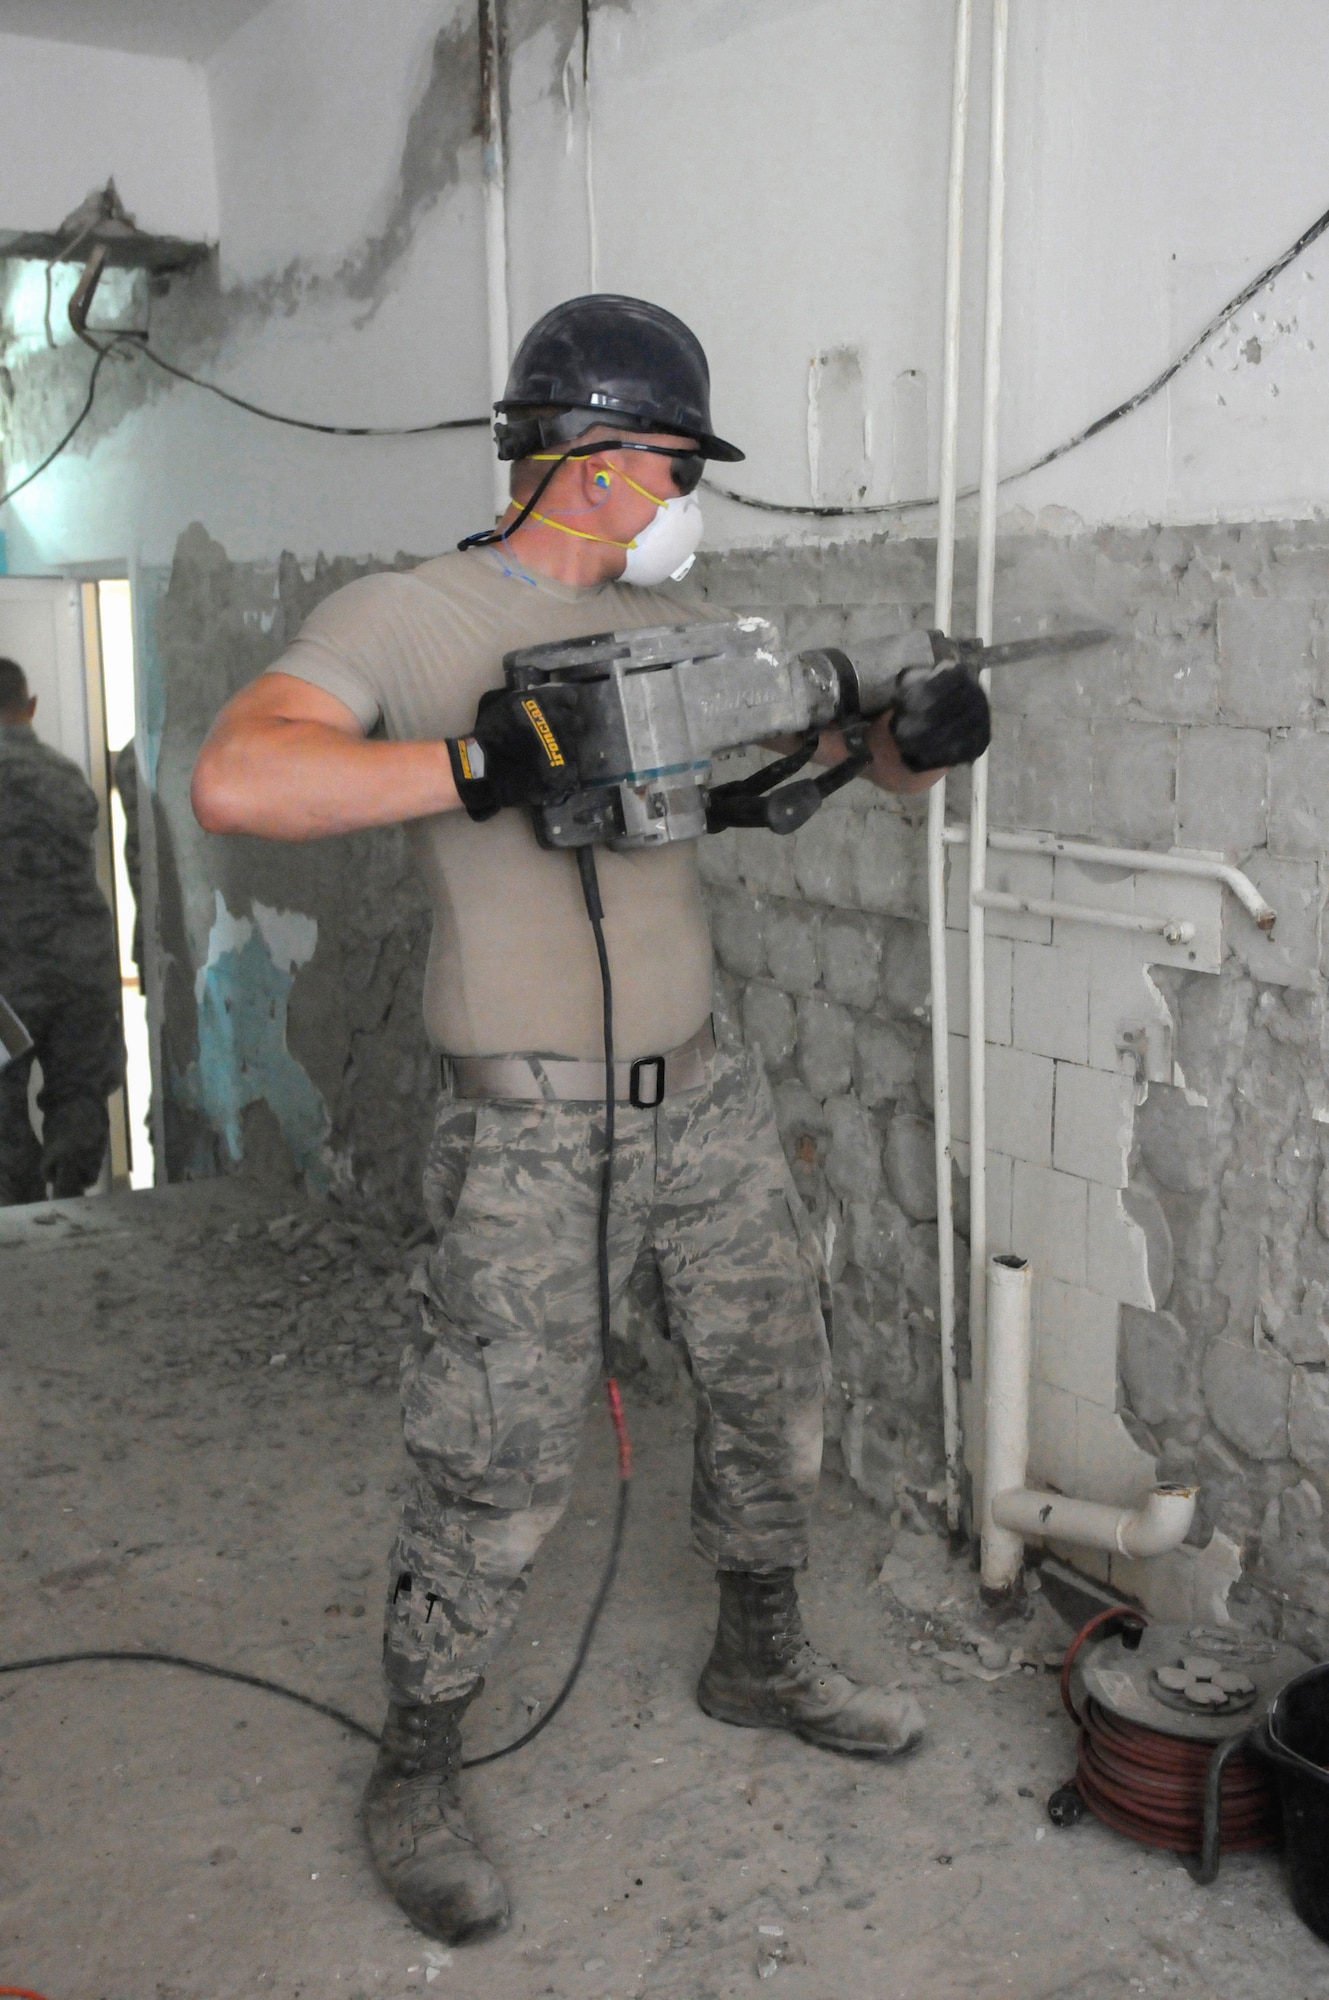 U.S. Air Force Airman First Class Joey Wurzelbacher from the Kentucky Air National Guard’s 123rd Civil Engineer Squadron in Louisville, Kentucky, removes old brick and tile work from the kitchen wall of Special School #12 in Chisinau, Moldova, June 4, 2016. More than 35 Airmen from the unit are renovating the institution, which is the only school in Moldova specifically for deaf and special-needs students. The humanitarian project is a partnership with the Office of Defense Cooperation and U.S. European Command, with funds being provided by the National Guard Bureau. (U.S. Air National Guard photo by Tech. Sgt. Vicky Spesard)